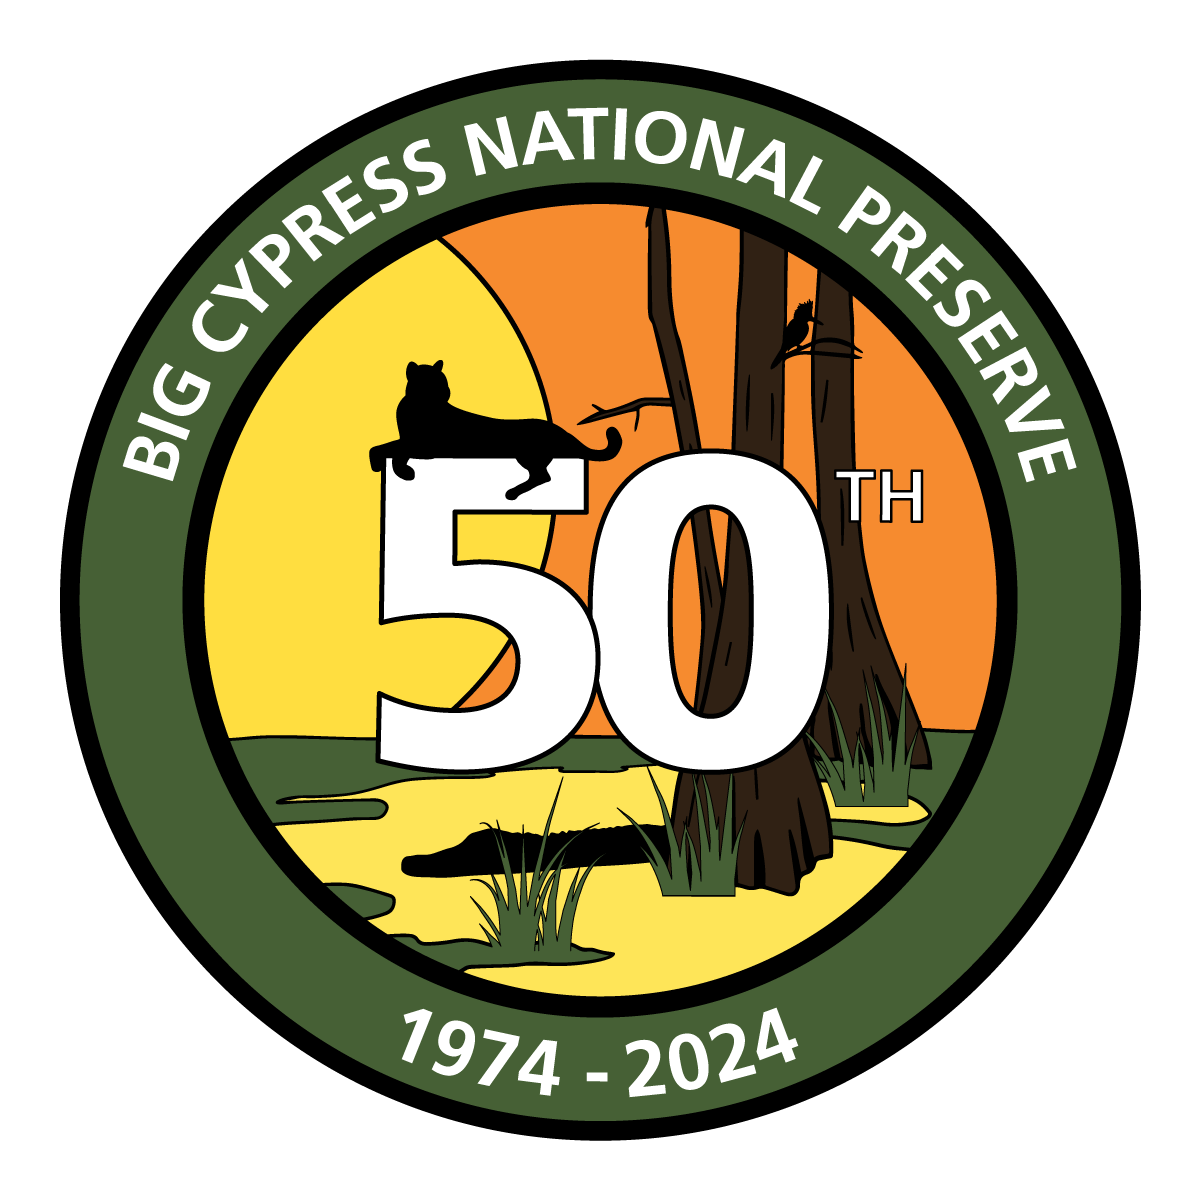 round logo with a green border and text that reads "Big Cypress National Preserve 1974-2024". Inside the logo is a big "50th" and a Florida panther resting atop the number 5. A big sun sets behind bald cypress and a kingfisher in the background.